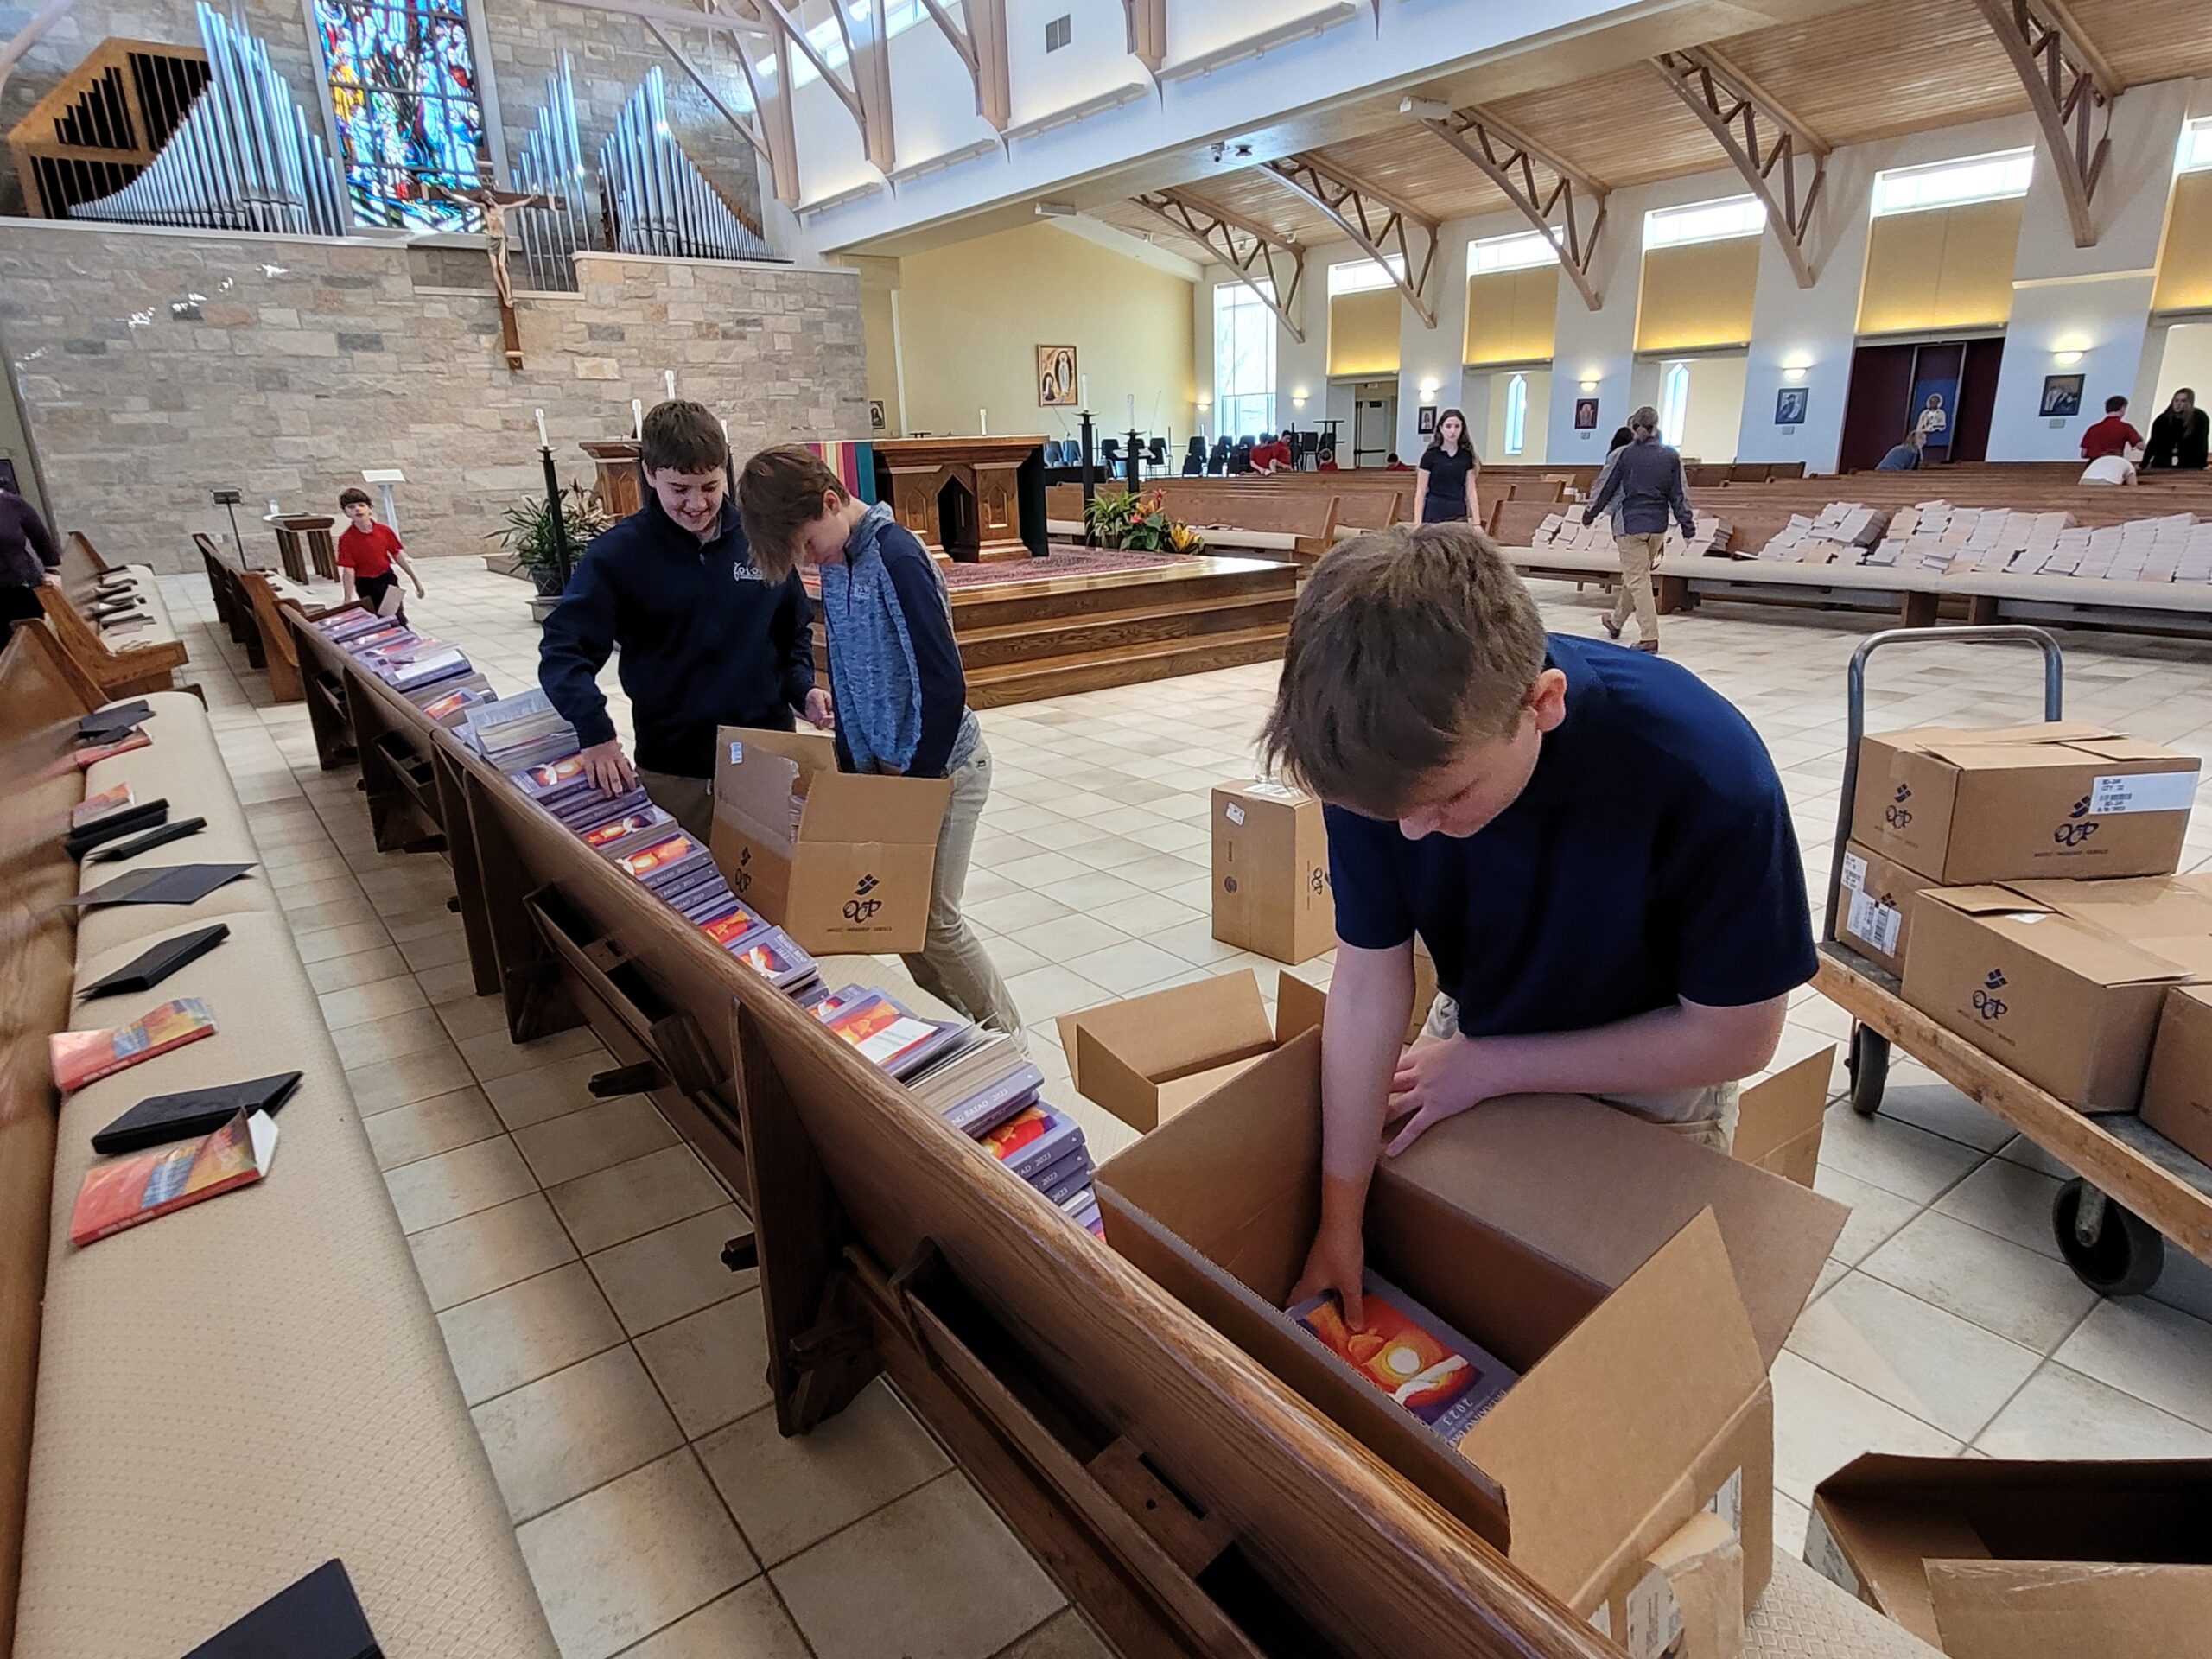 Our Lady of Lourdes Catholic School students pack books